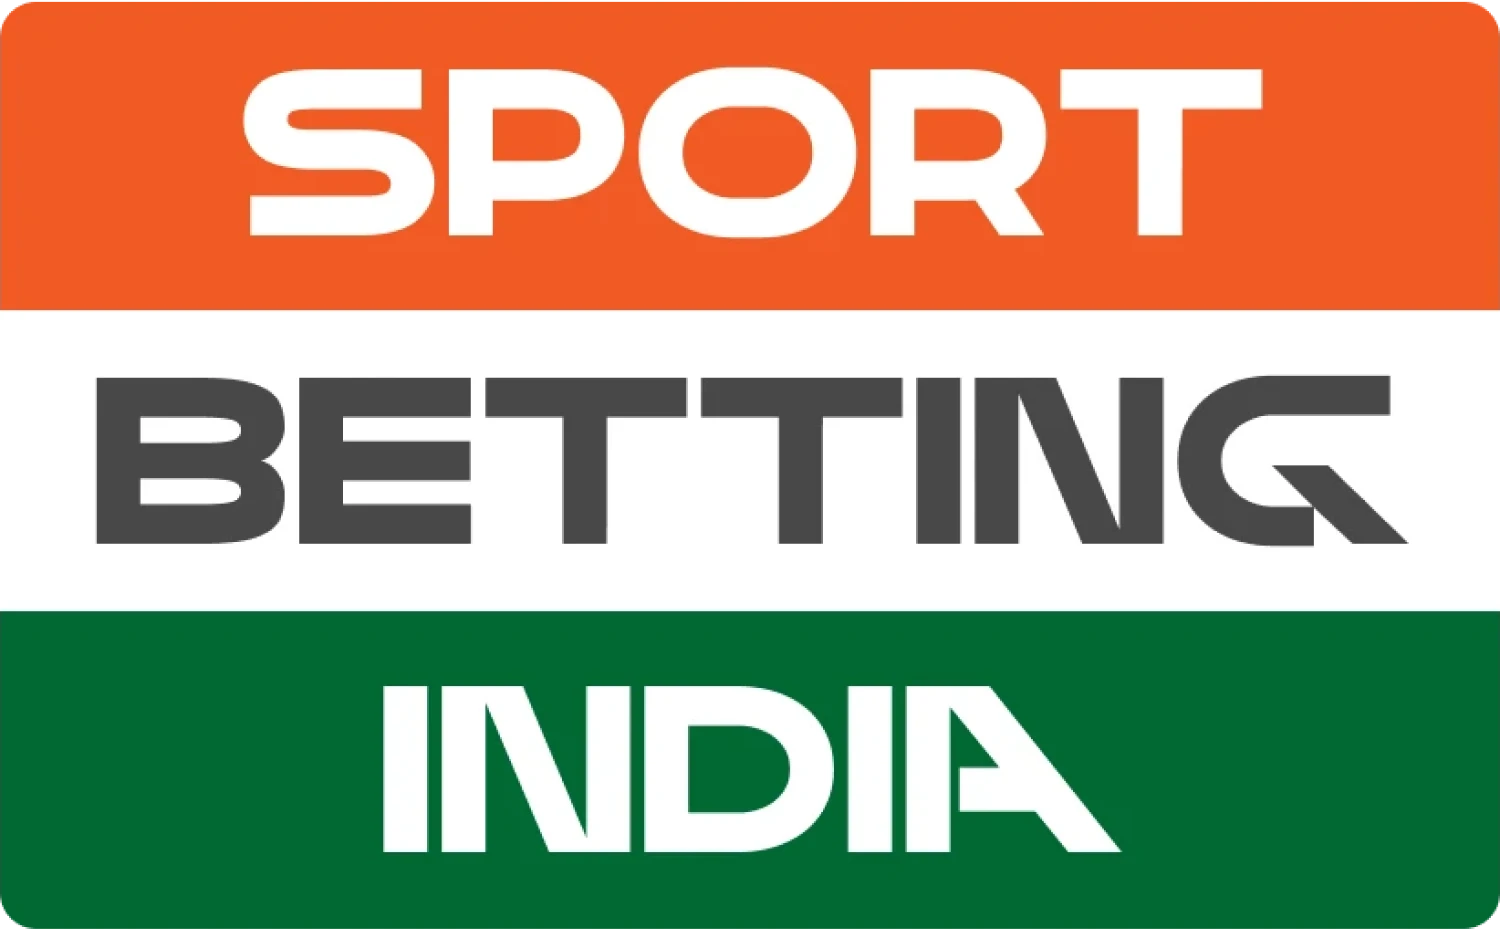 Visit Sport Betting India to read about betting.